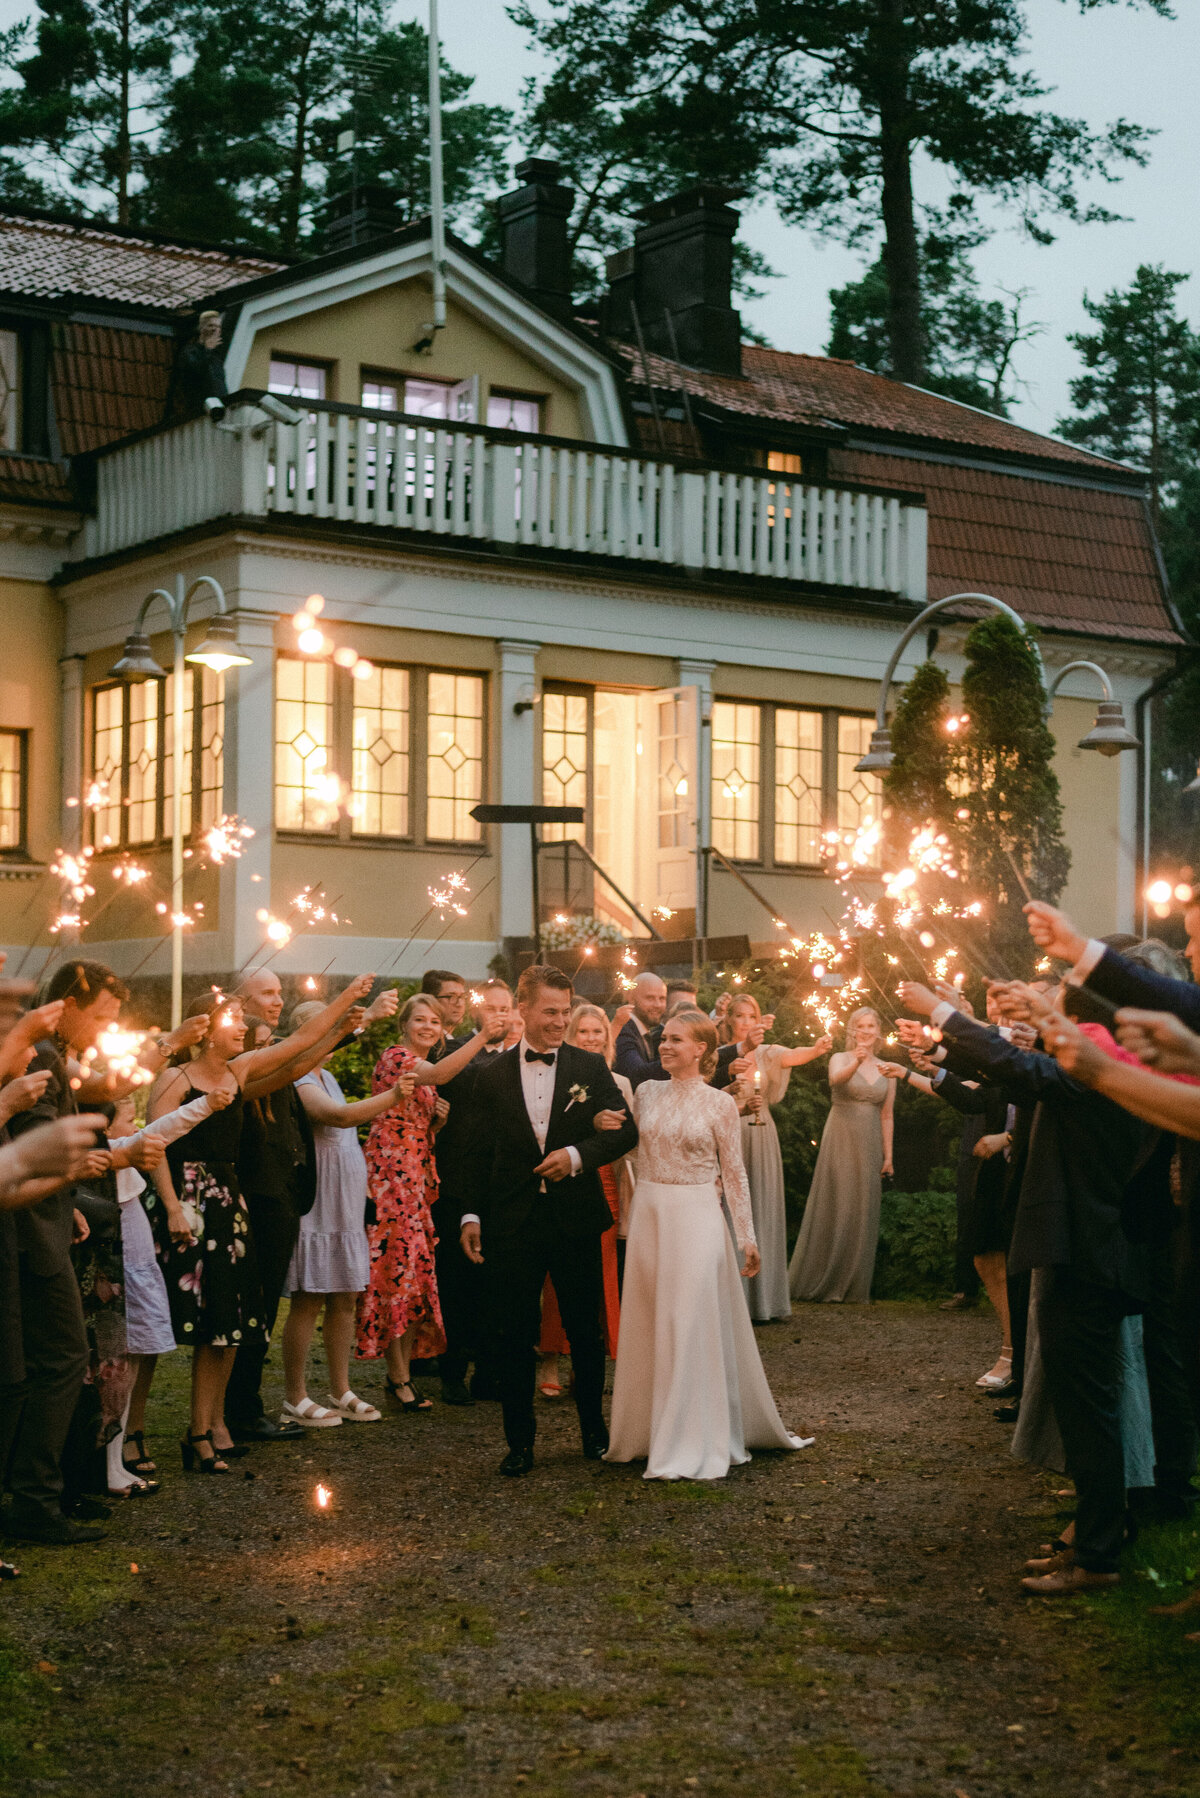 Documentary wedding photo of bride and groom in front of Airisniemi manor in Turku. Wedding guests are holding sparkles. A cheerful and romantic image by wedding photographer Hannika Gabrielsson.